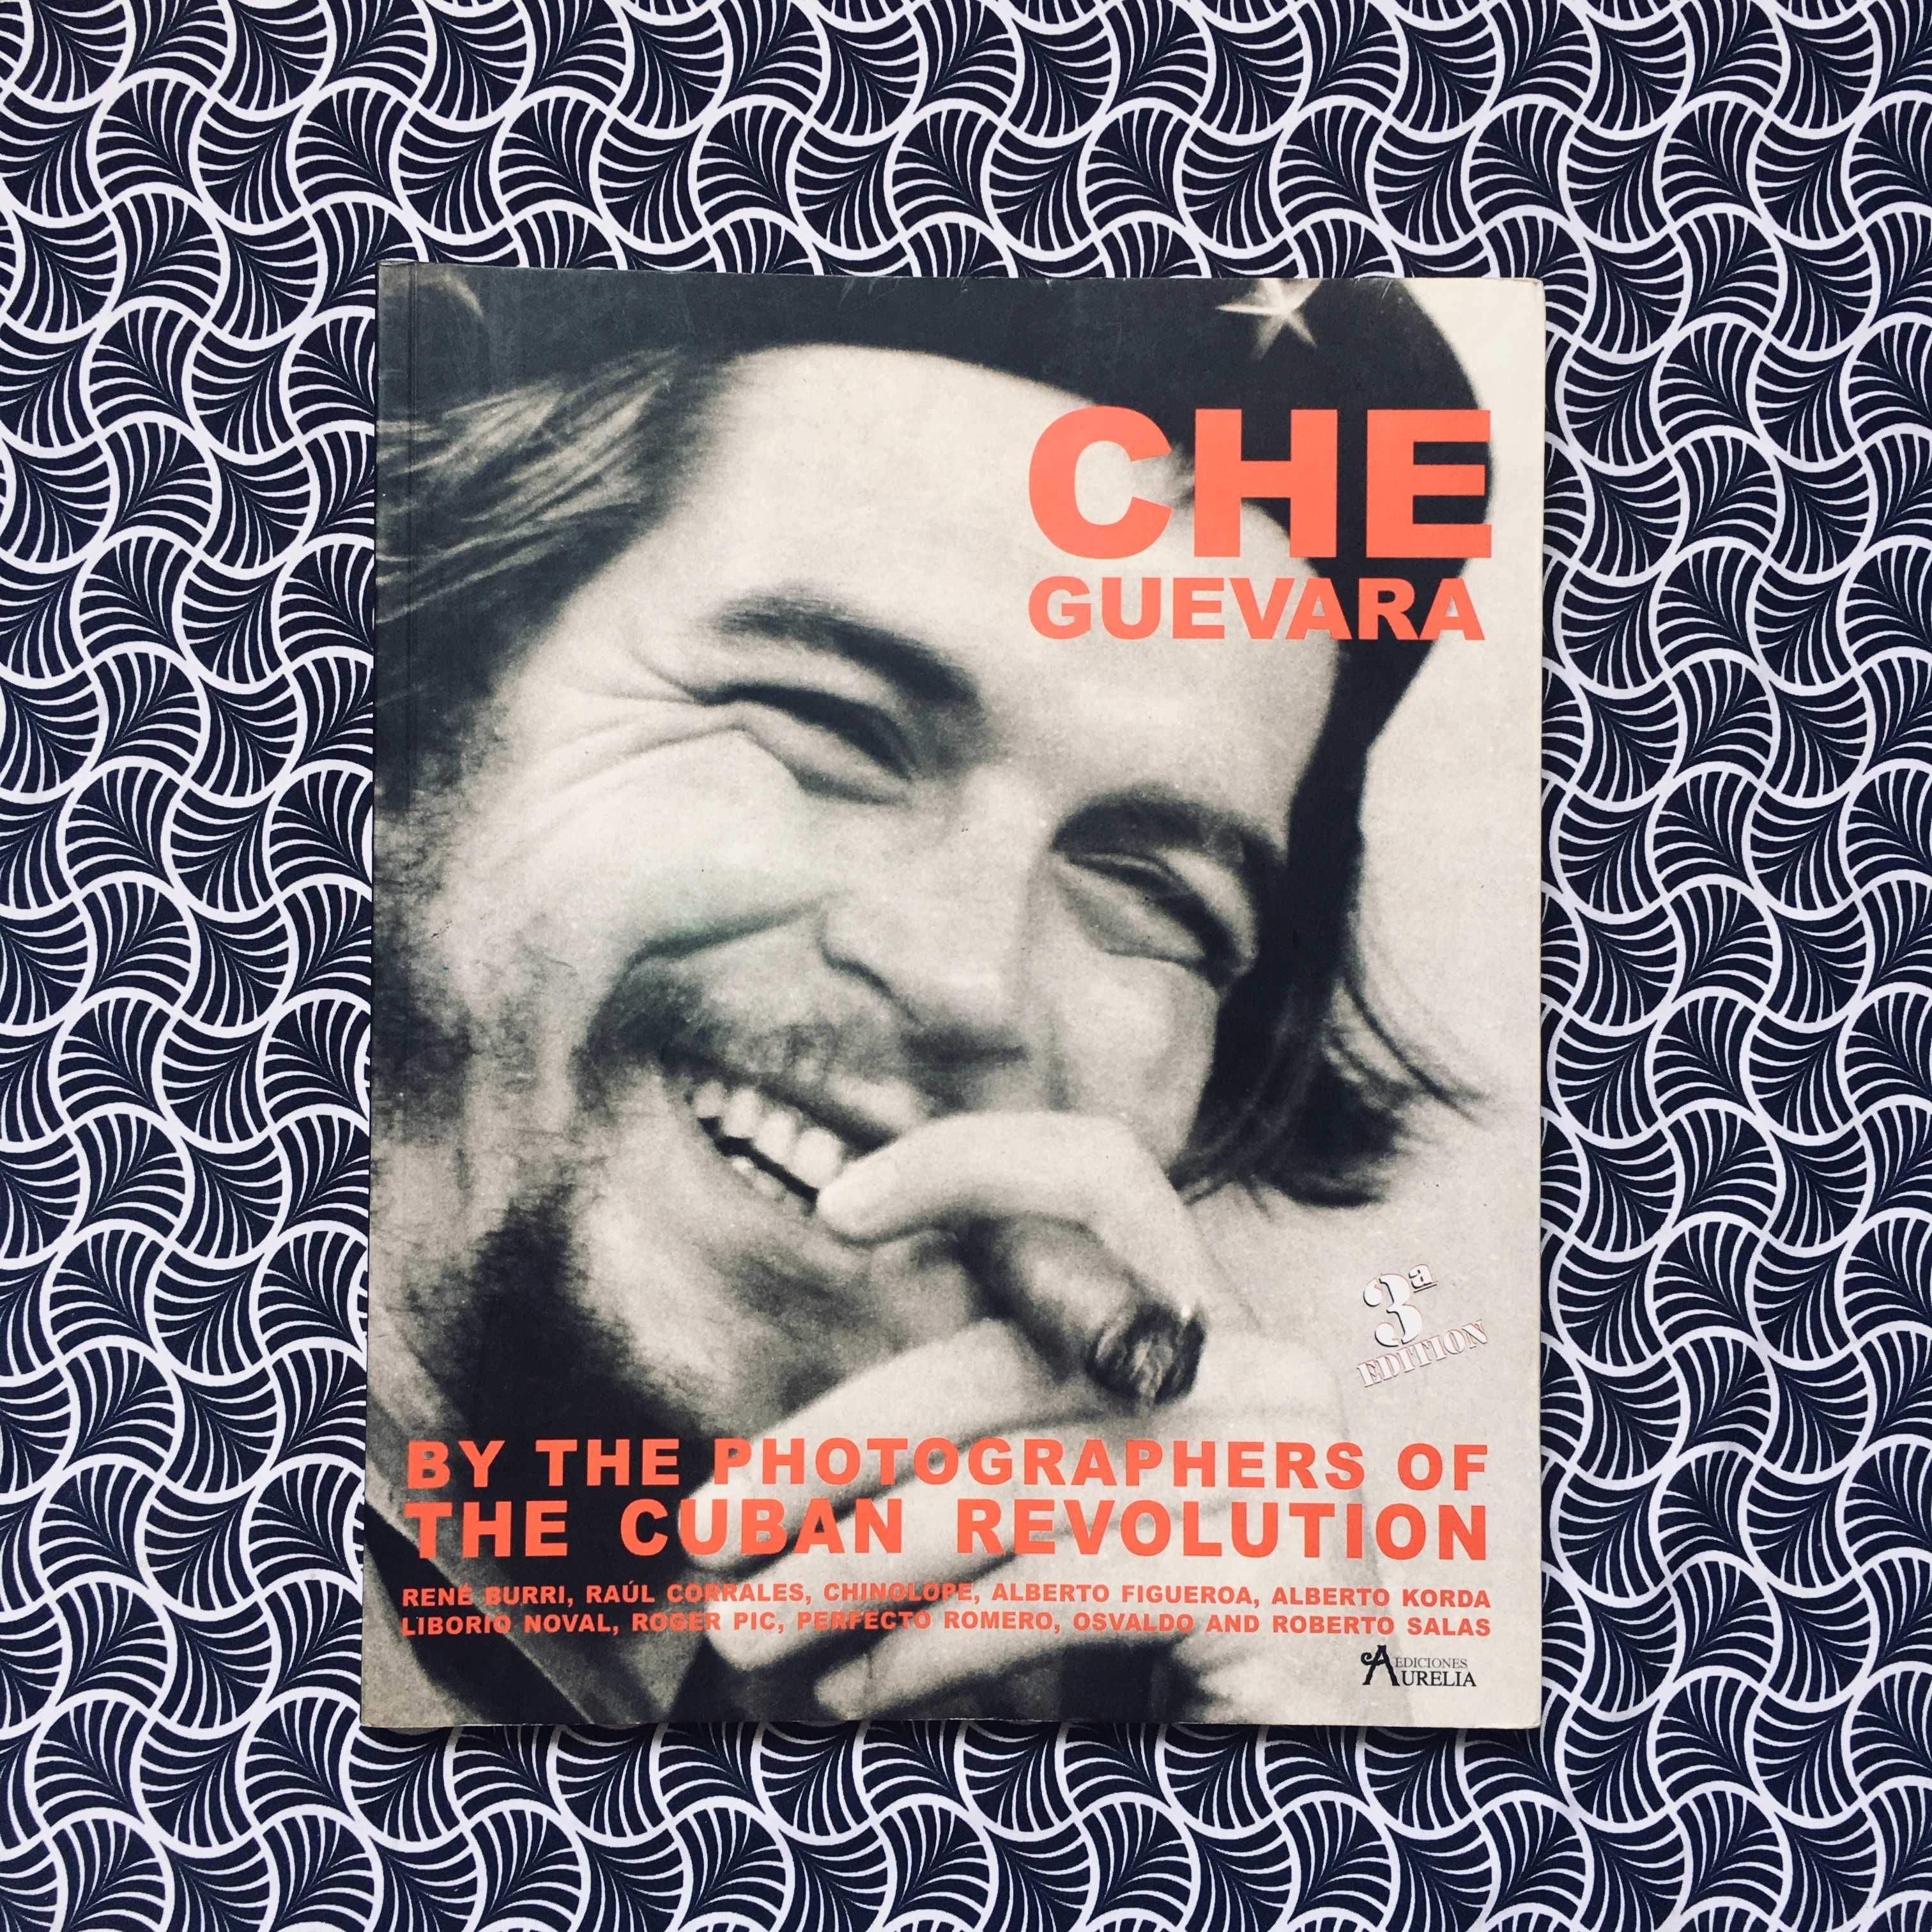 Che Guevara - By The Photographers of the Cuban Revolution